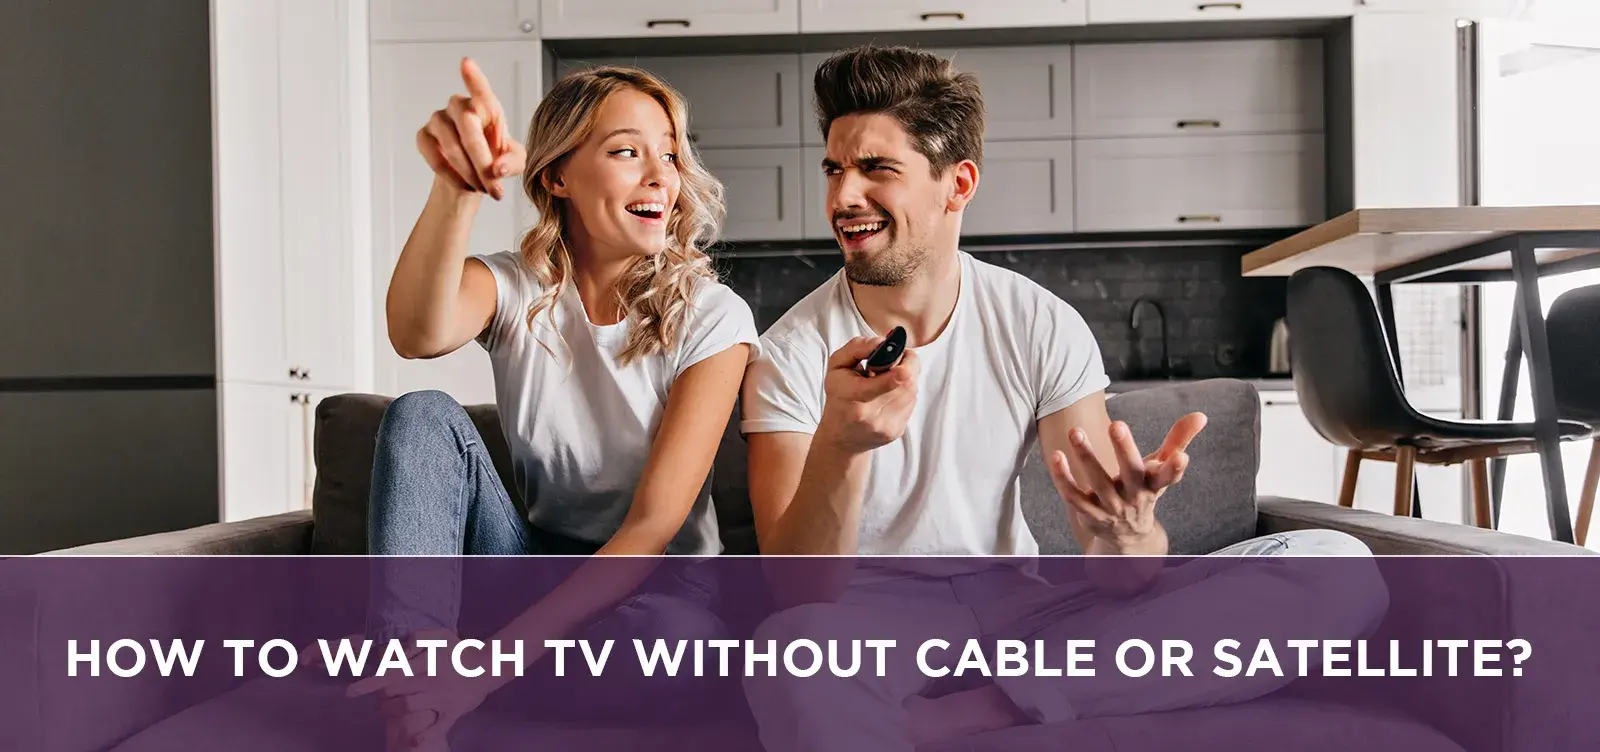 How to watch tv without cable or satellite